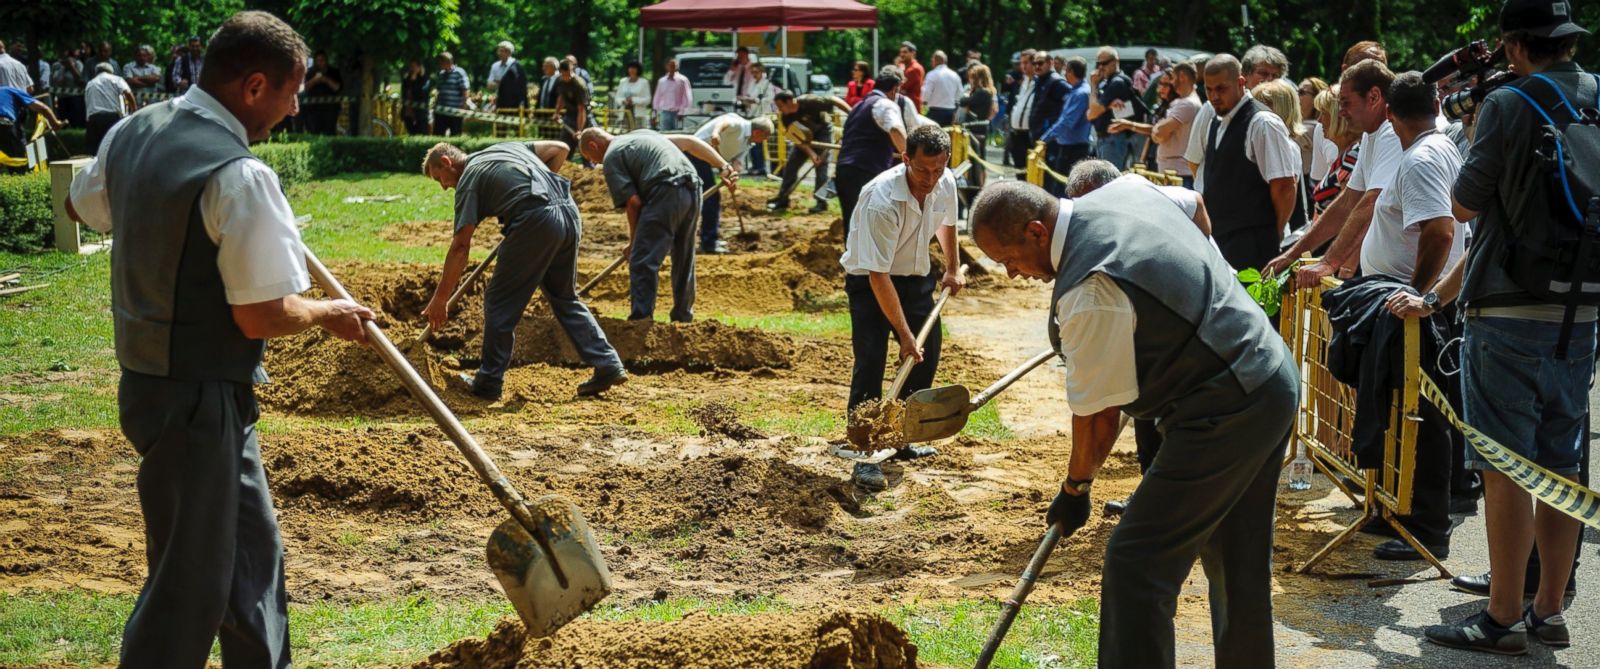 Grave Digging Championships in Hungary